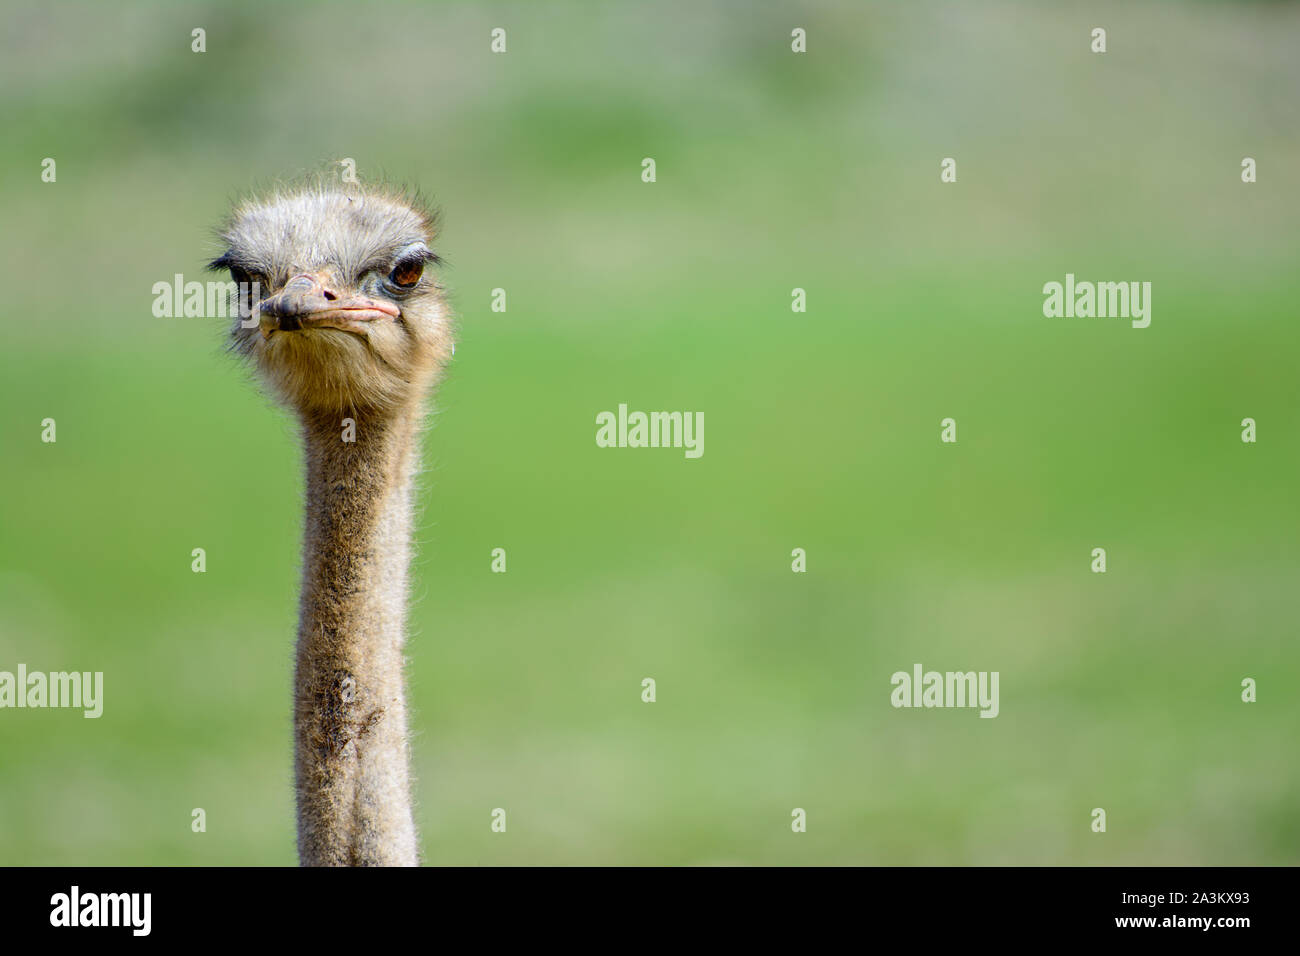 Ostrich Staring at camera with a funny expression. Copy Space on Right Stock Photo